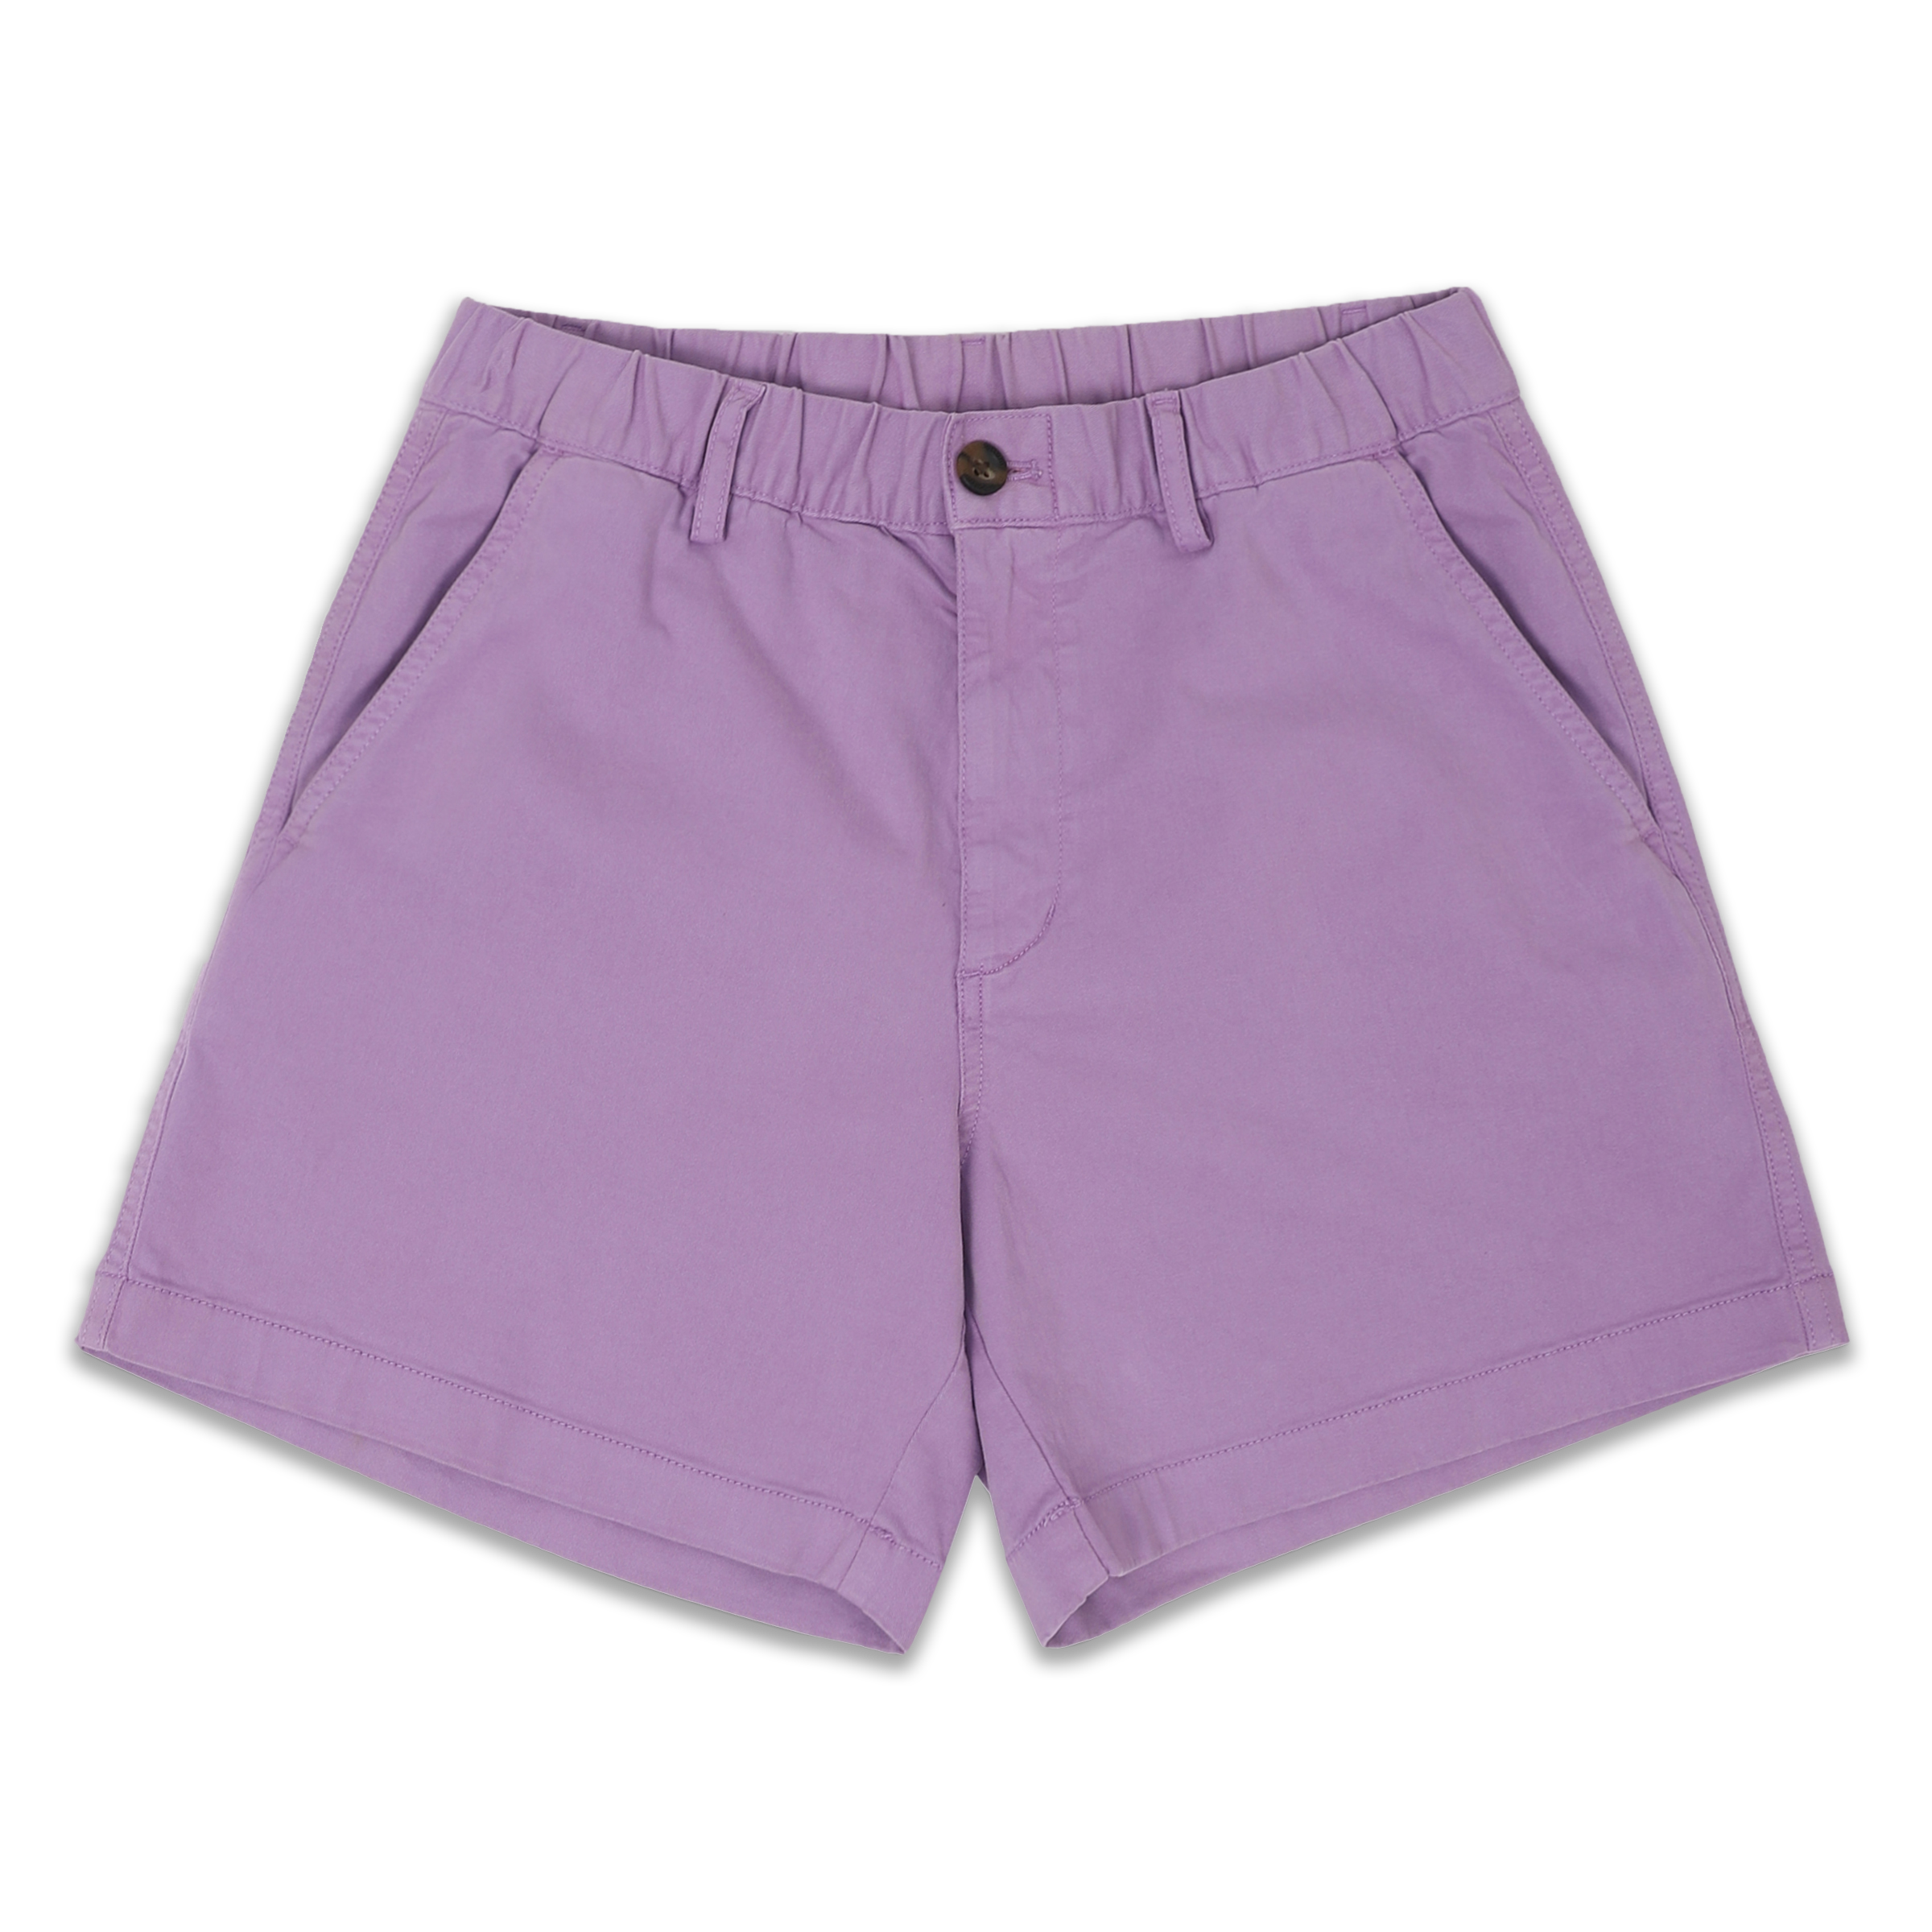 Stretch Short 5.5" Lilac front with elastic waistband, belt loops, zipper fly, faux horn button, and two inseam pockets